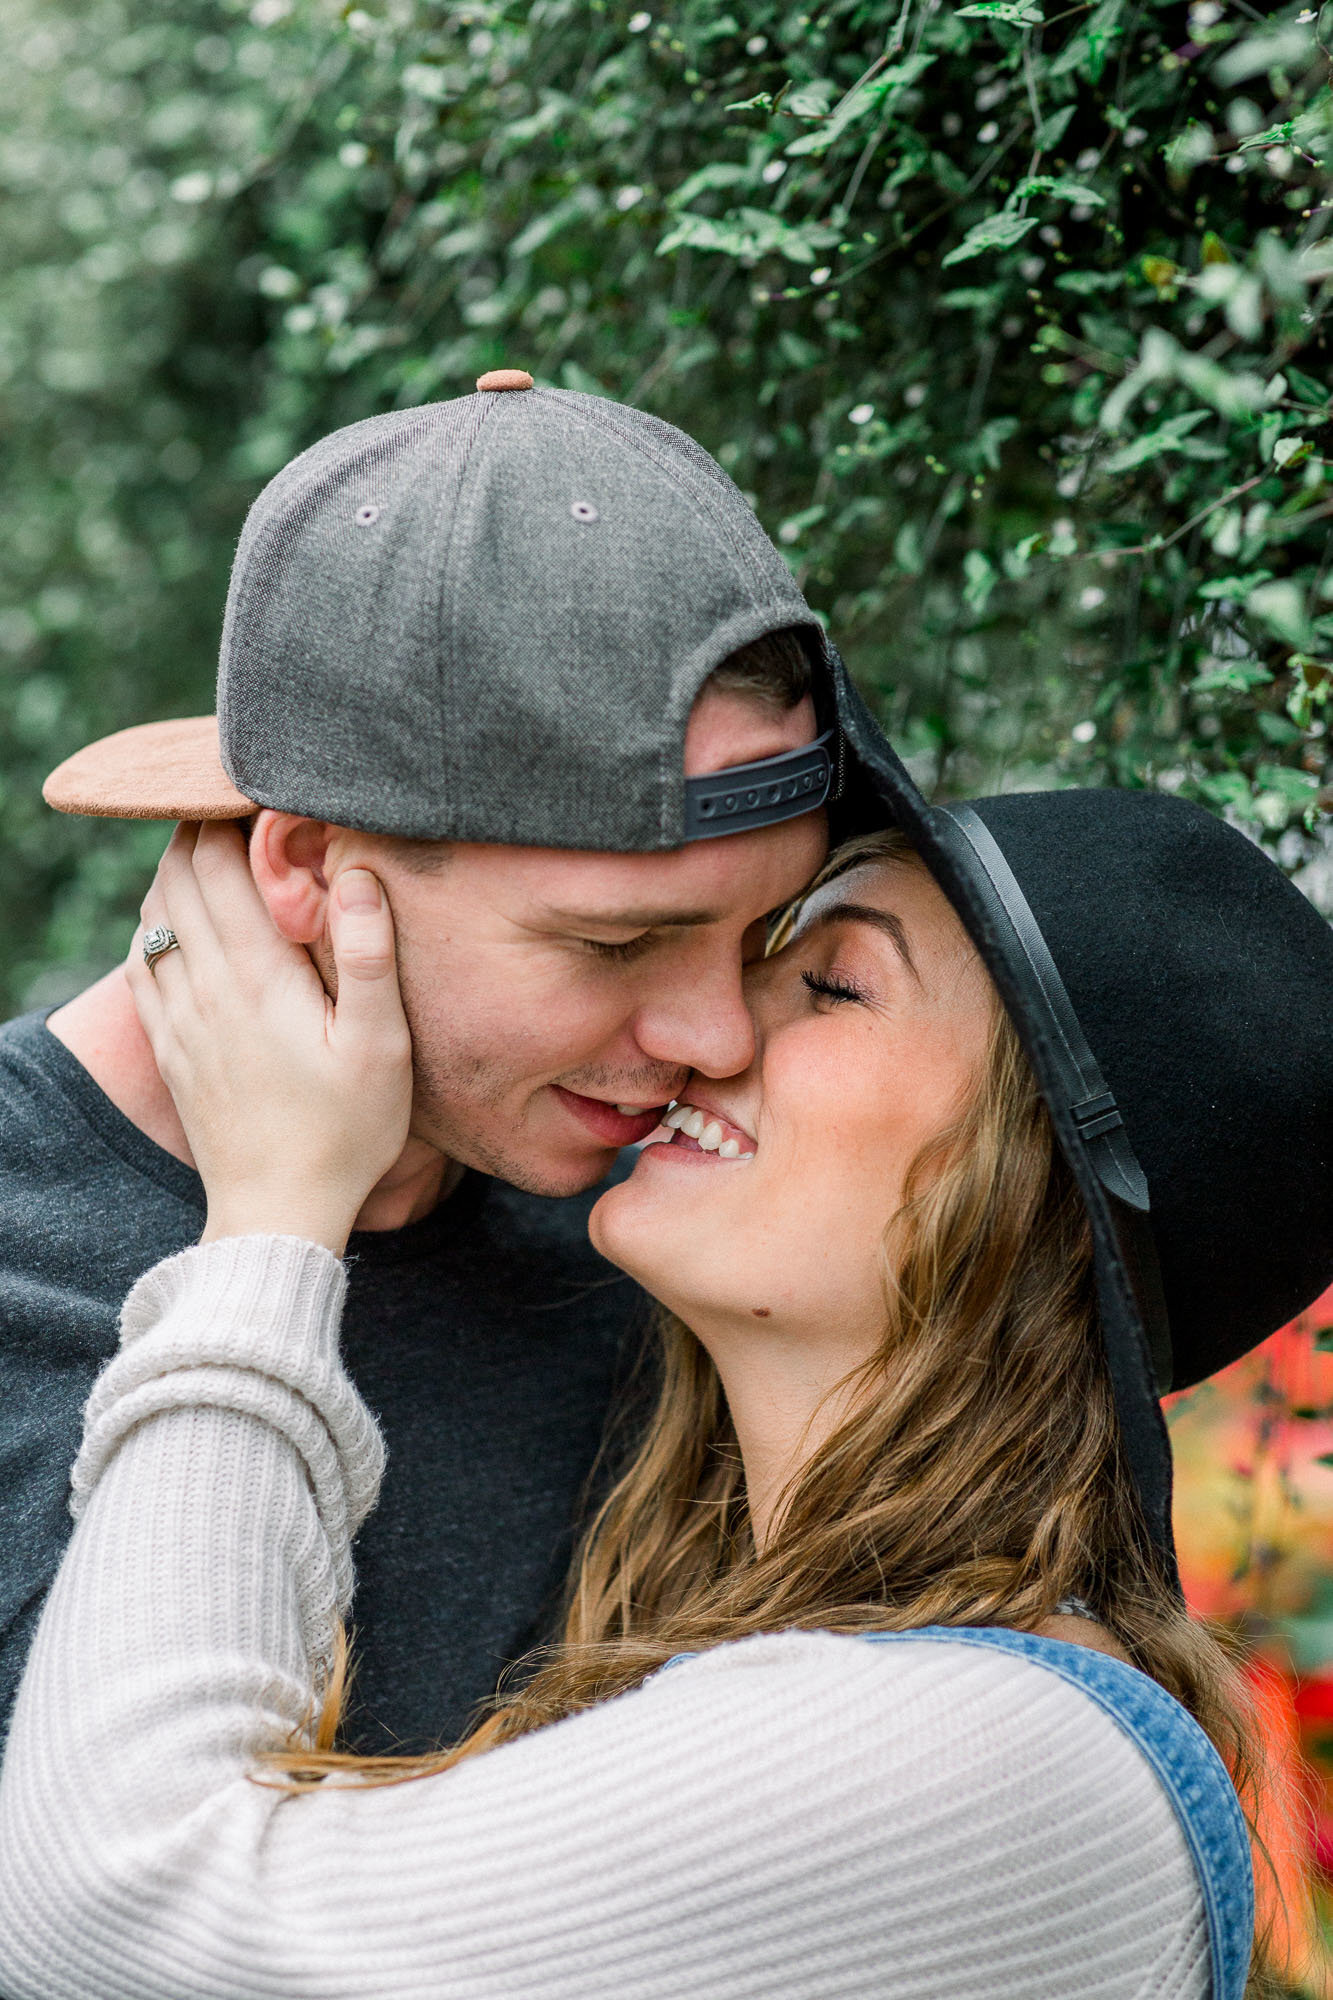 Engagement session in Newnan, Georgia captured by Staci Addison Photography